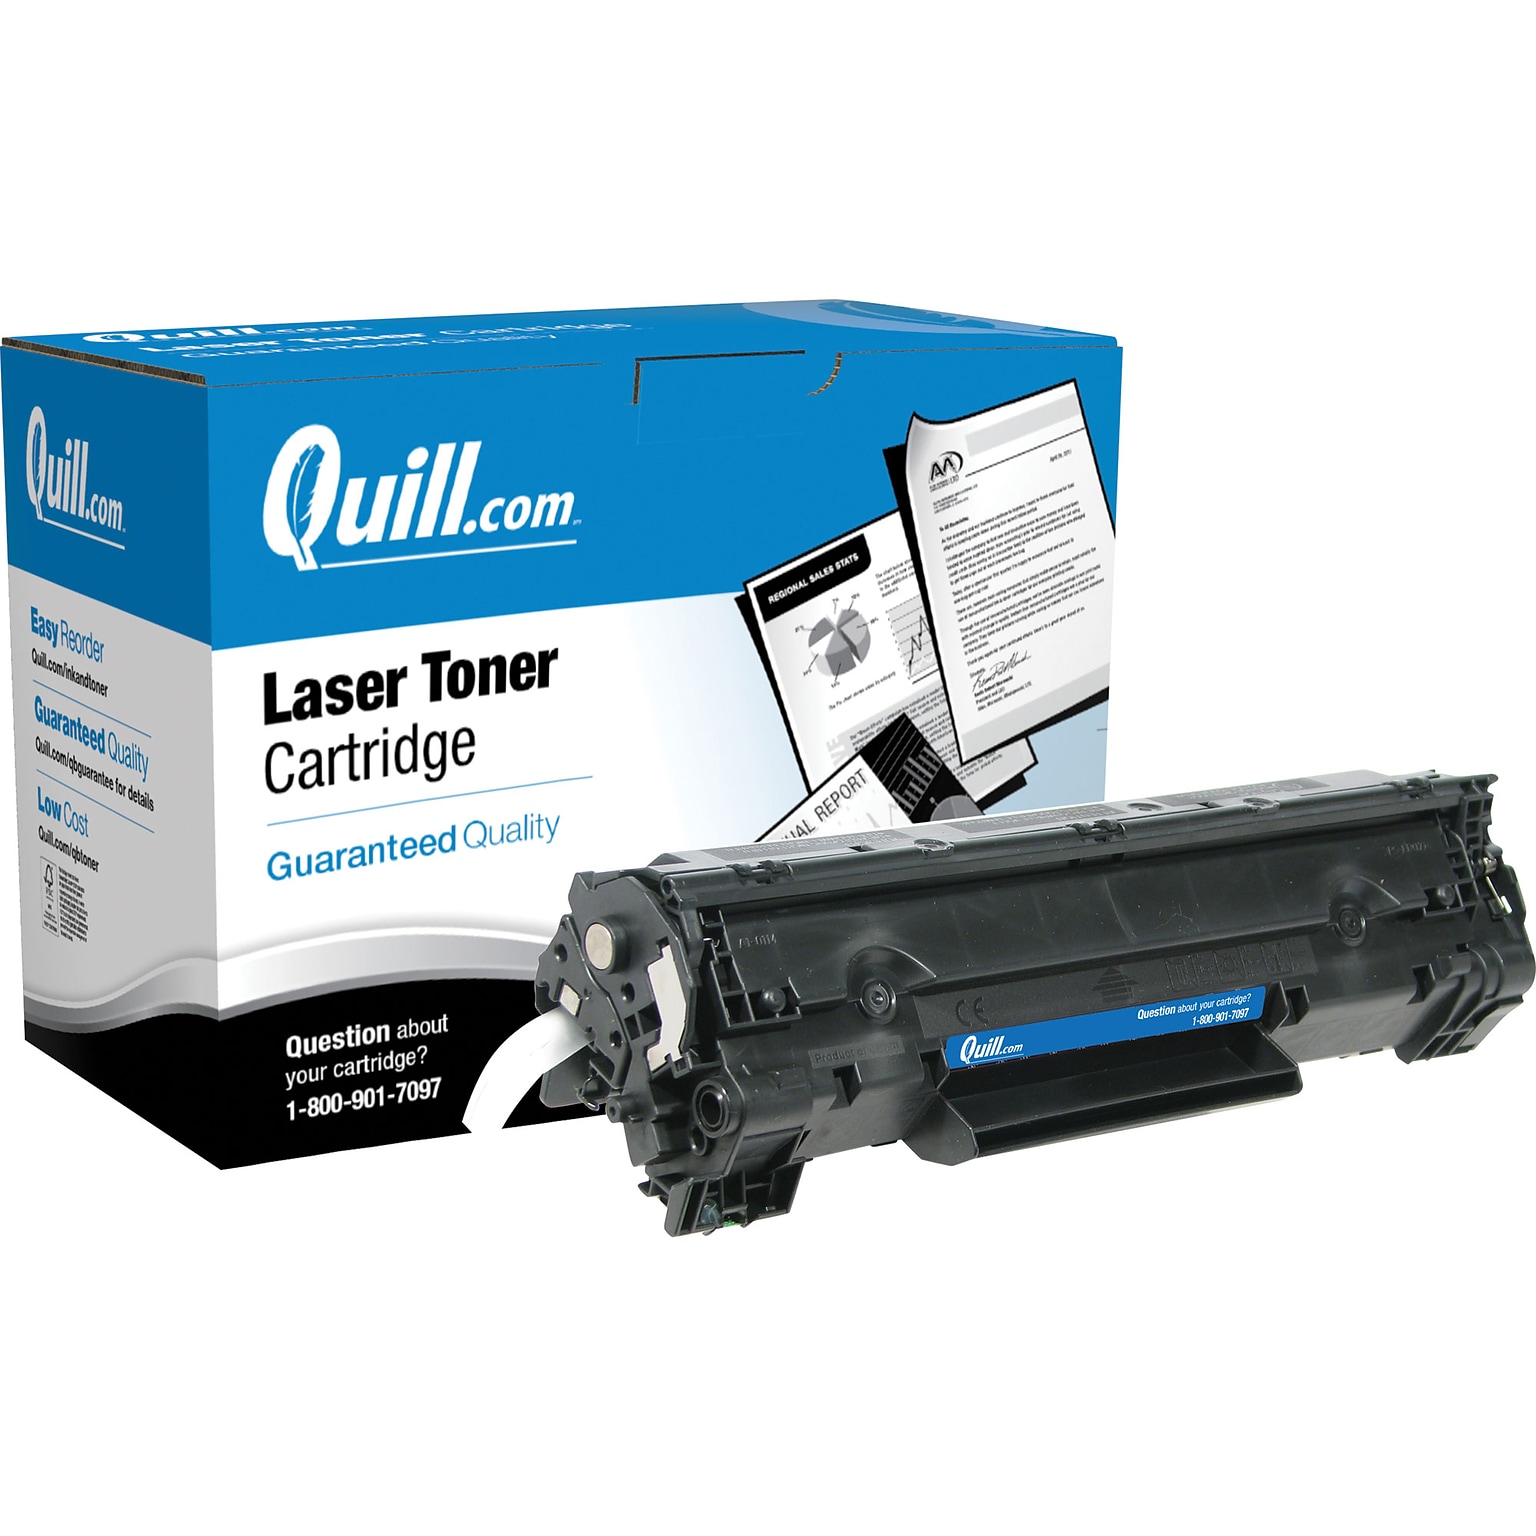 Quill Brand Remanufactured HP 36A (CB436A) Black Extra High Yield Laser Toner Cartridge (100% Satisfaction Guaranteed)